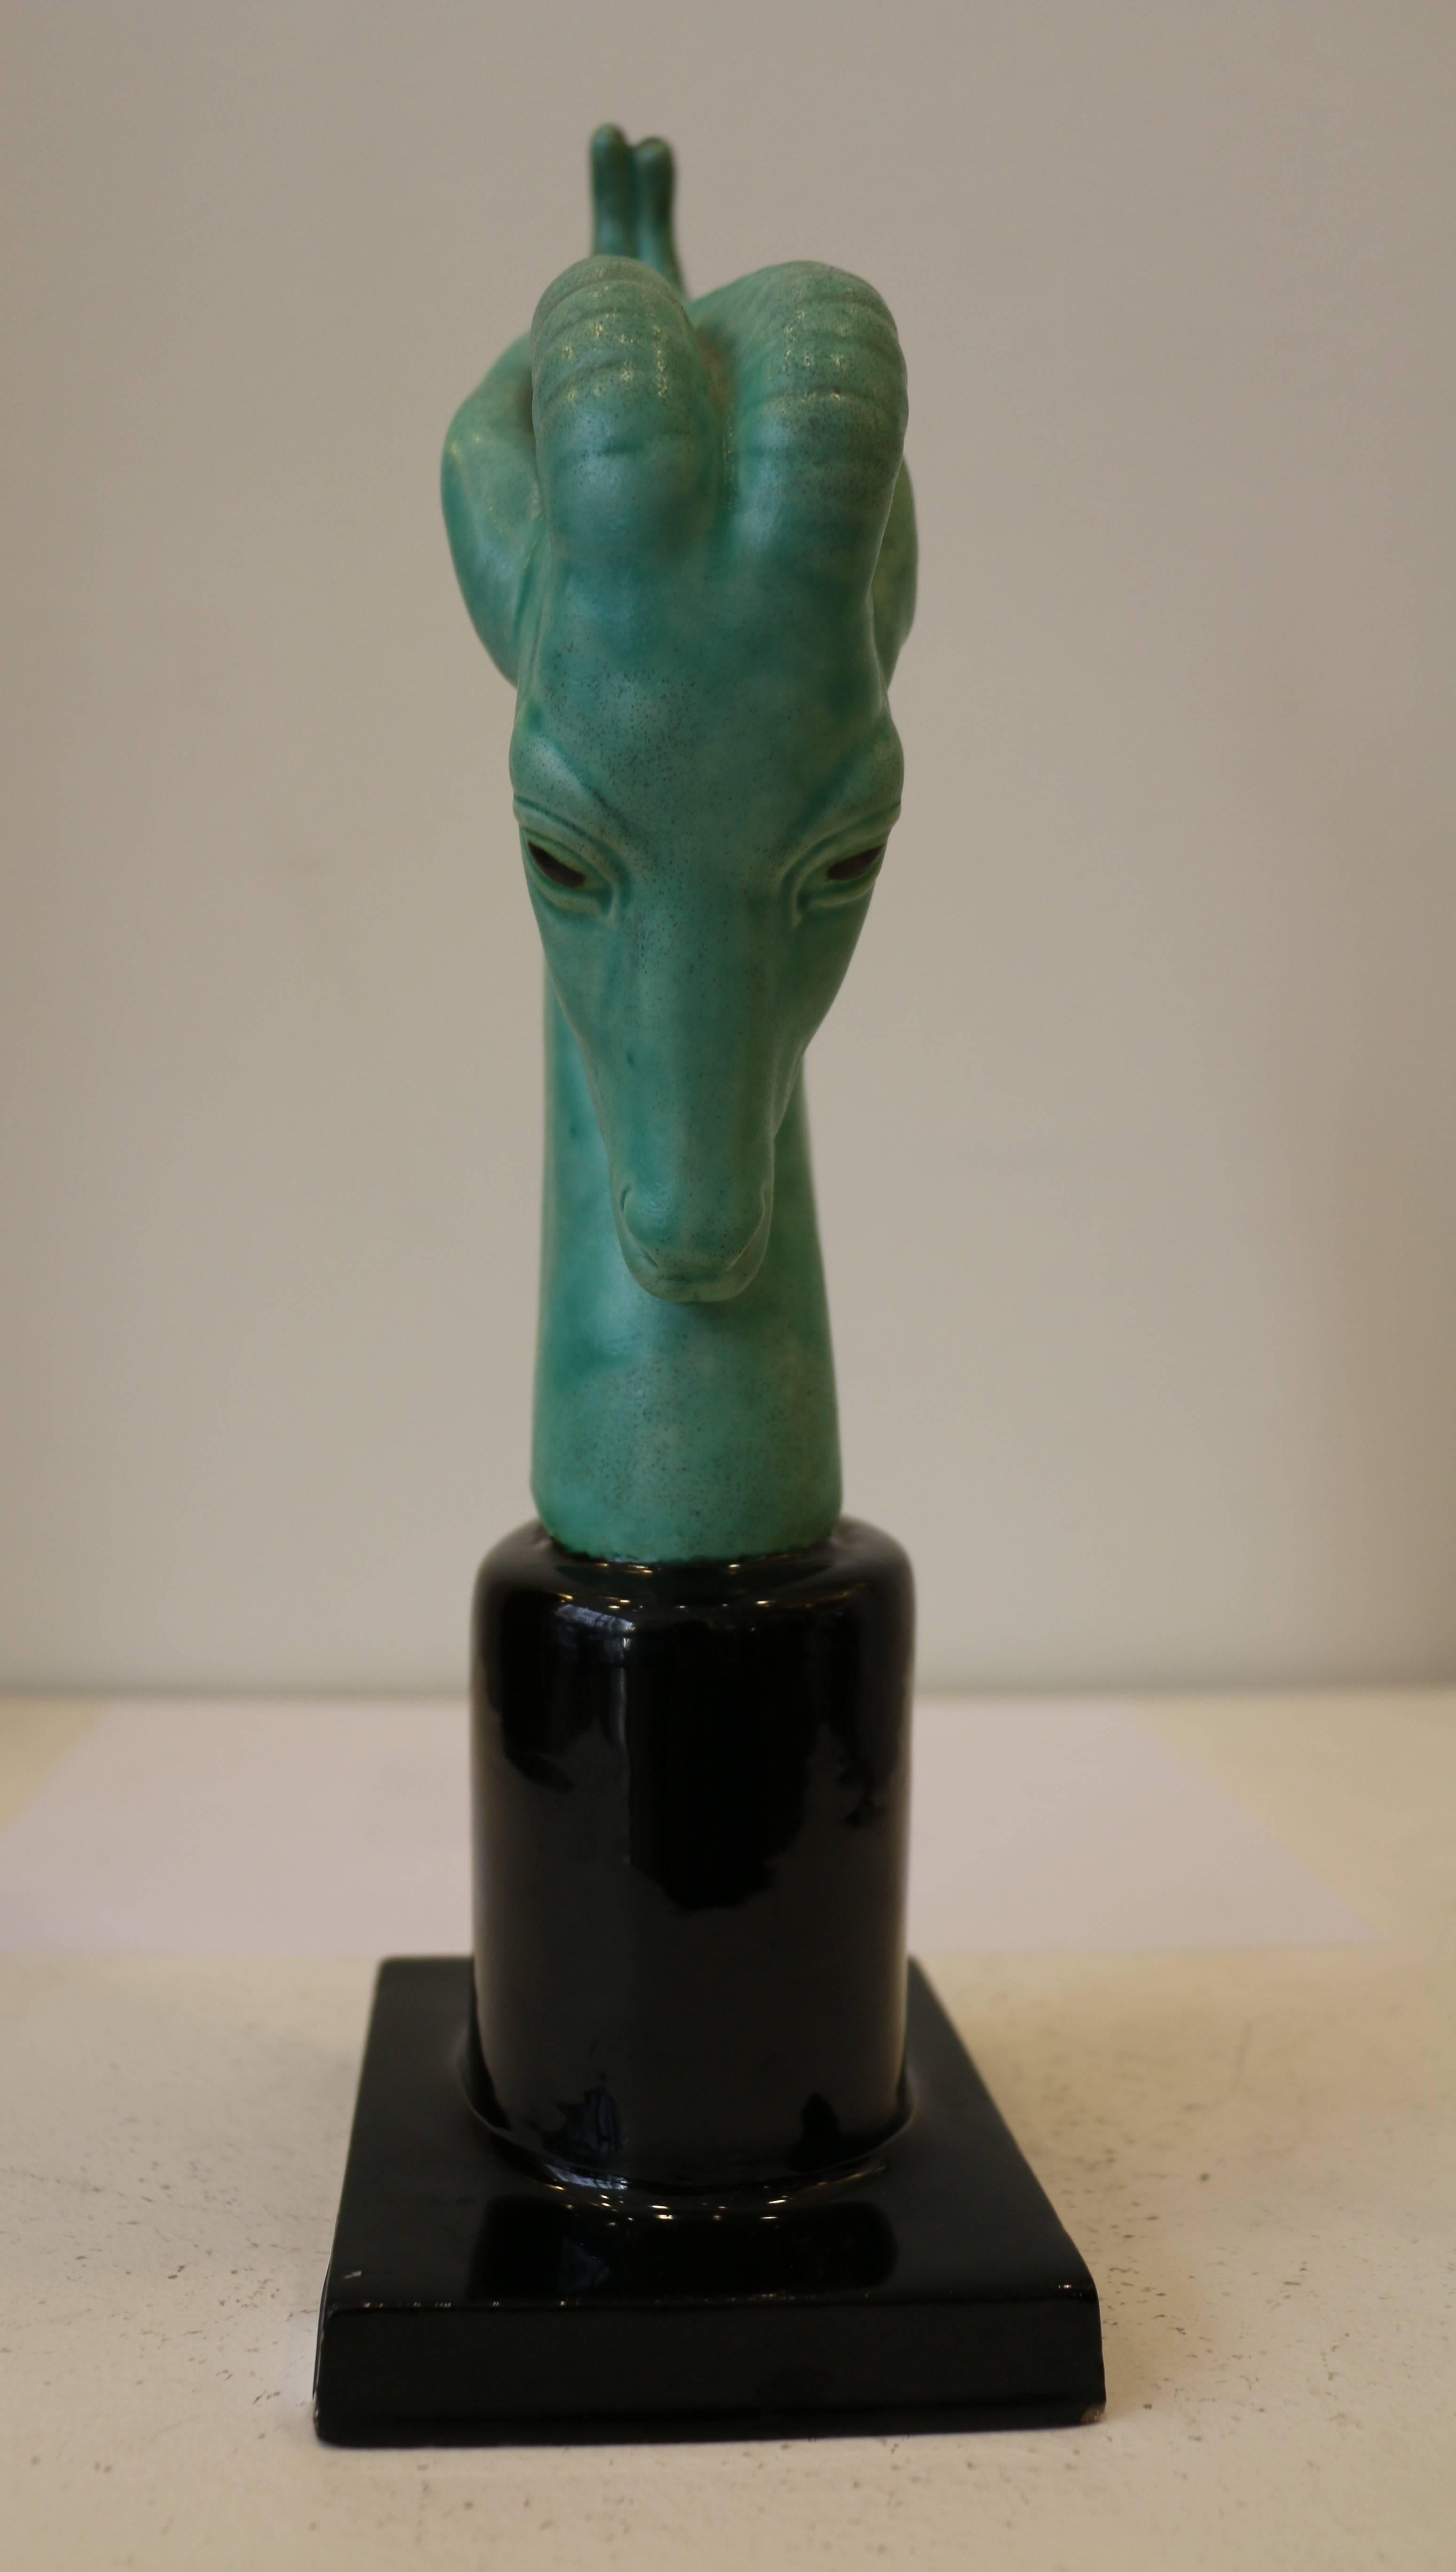 Superb and rare head of an Antilope by Paul Milet (1870-1950).
Sèvres China. 
Seagreen color for the head and black for the column shaped base.
